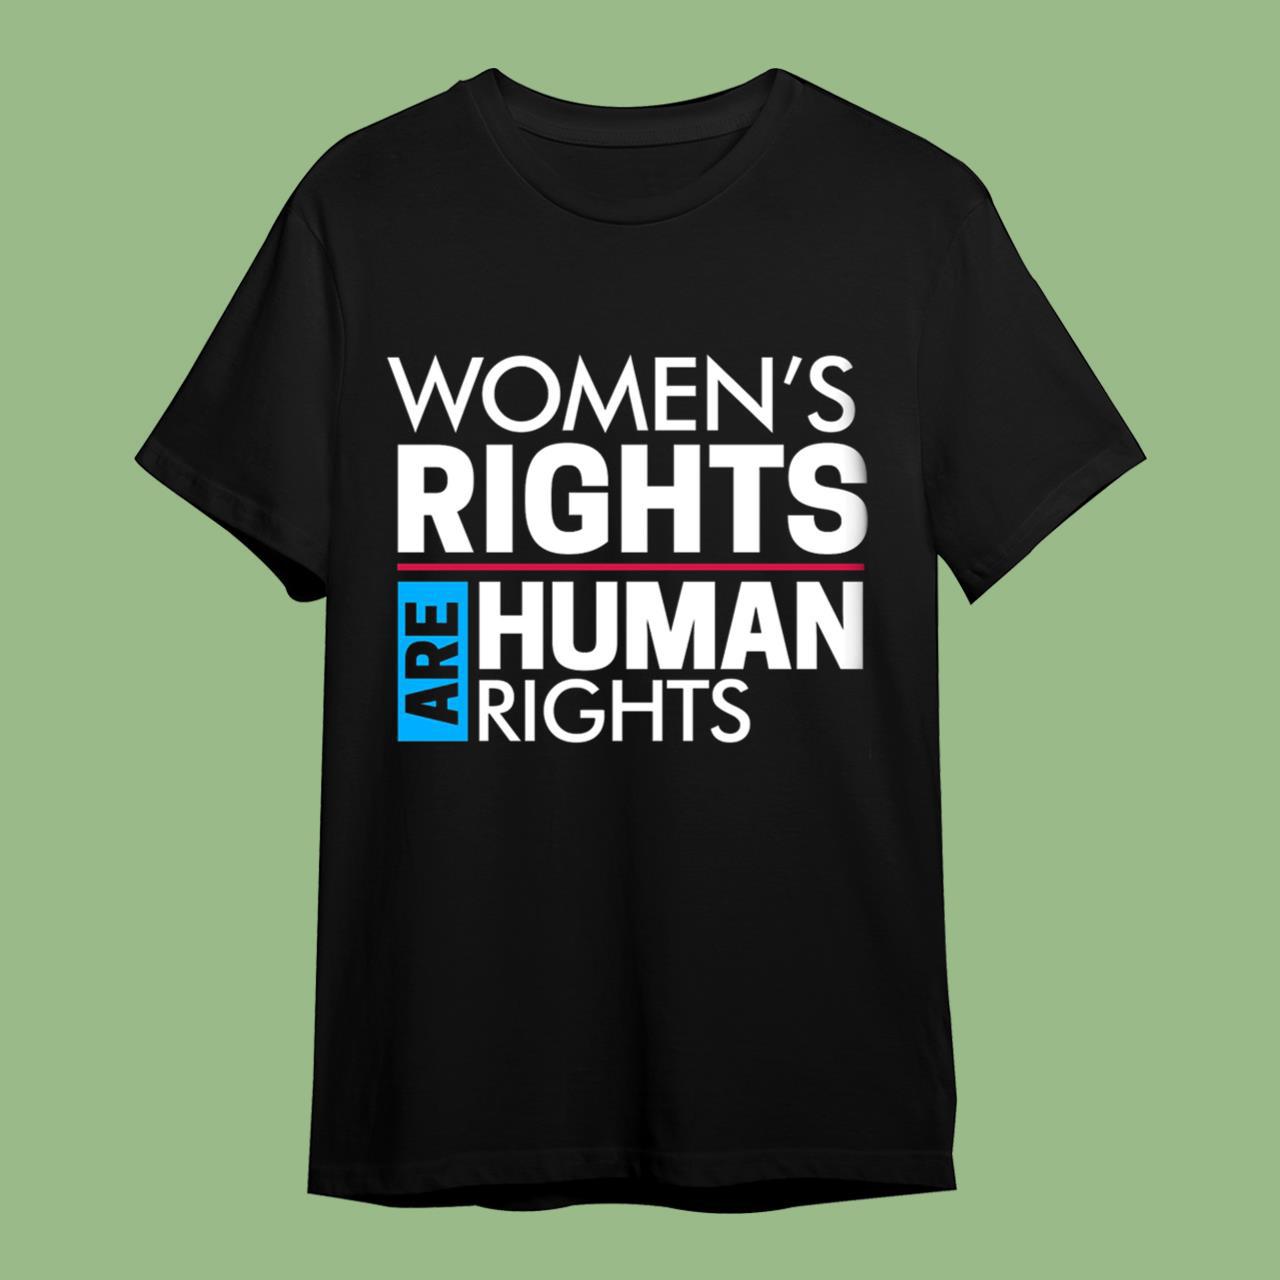 Women’s Rights are Human Rights Tee Shirt